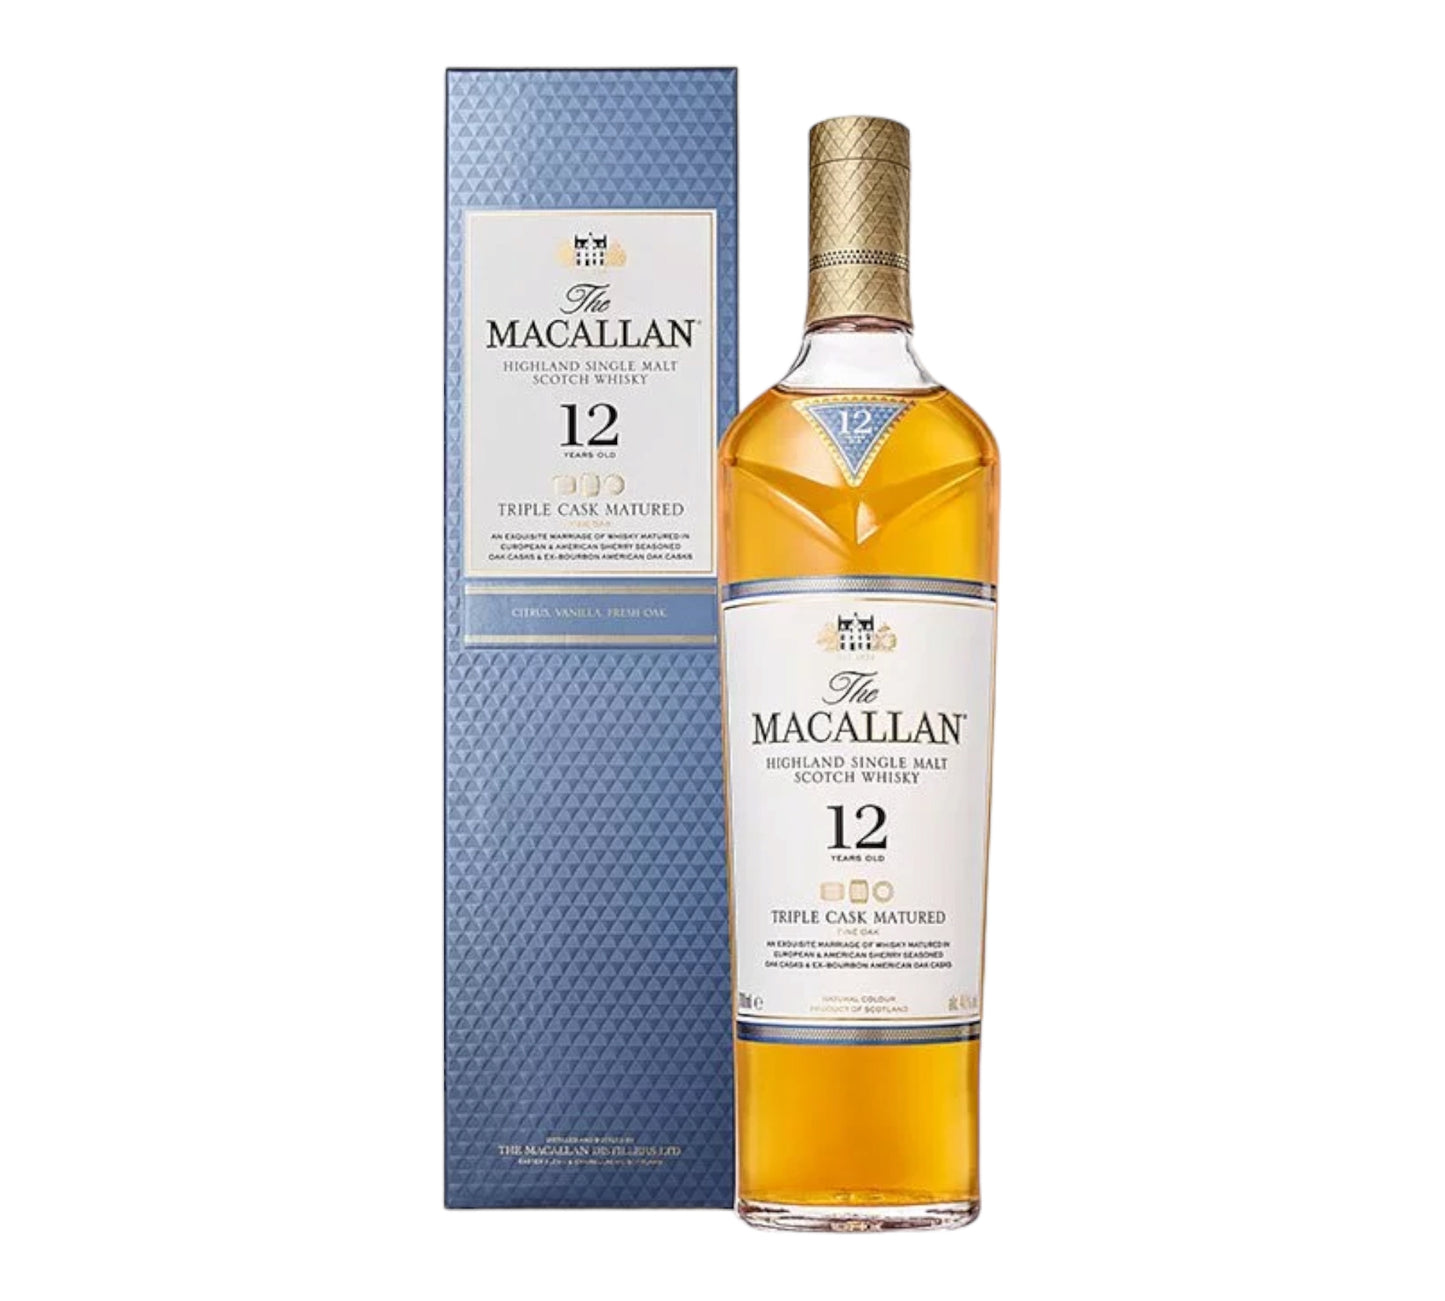 The Macallan Triple Cask Matured 12 Years Old 70cl whisky Macallan 斯貝賽區 混桶